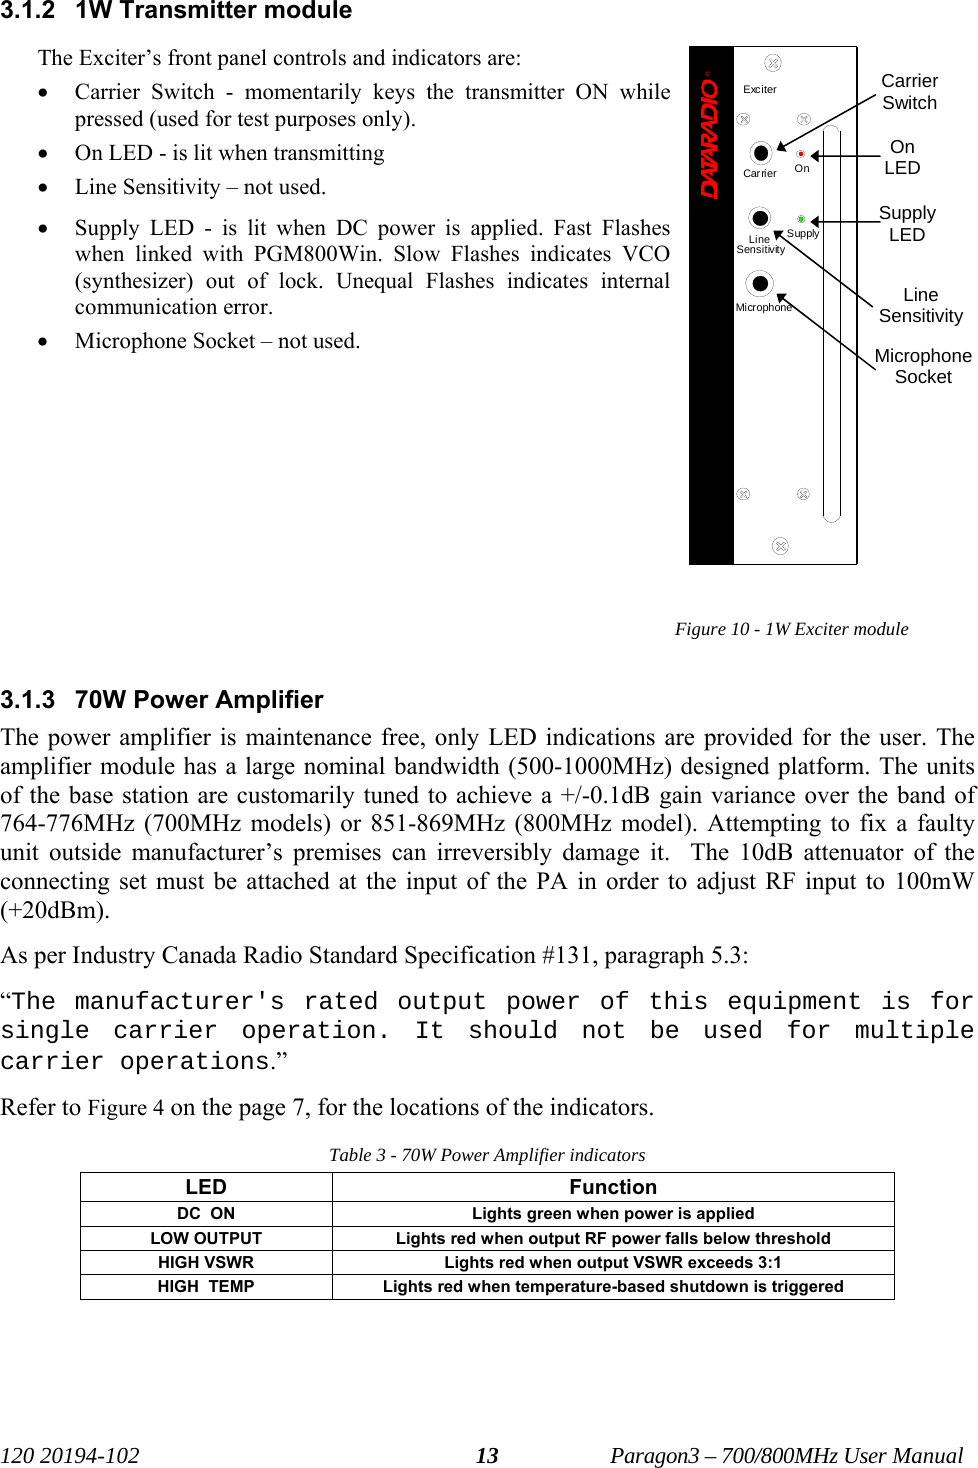   120 20194-102   Paragon3 – 700/800MHz User Manual 133.1.2  1W Transmitter module The Exciter’s front panel controls and indicators are: • Carrier Switch - momentarily keys the transmitter ON while pressed (used for test purposes only). • On LED - is lit when transmitting • Line Sensitivity – not used. • Supply LED - is lit when DC power is applied. Fast Flashes when linked with PGM800Win. Slow Flashes indicates VCO (synthesizer) out of lock. Unequal Flashes indicates internal communication error. • Microphone Socket – not used.           Figure 10 - 1W Exciter module  3.1.3  70W Power Amplifier The power amplifier is maintenance free, only LED indications are provided for the user. The amplifier module has a large nominal bandwidth (500-1000MHz) designed platform. The units of the base station are customarily tuned to achieve a +/-0.1dB gain variance over the band of 764-776MHz (700MHz models) or 851-869MHz (800MHz model). Attempting to fix a faulty unit outside manufacturer’s premises can irreversibly damage it.  The 10dB attenuator of the connecting set must be attached at the input of the PA in order to adjust RF input to 100mW (+20dBm).  As per Industry Canada Radio Standard Specification #131, paragraph 5.3: “The manufacturer&apos;s rated output power of this equipment is for single carrier operation. It should not be used for multiple carrier operations.” Refer to Figure 4 on the page 7, for the locations of the indicators. Table 3 - 70W Power Amplifier indicators LED Function DC  ON  Lights green when power is applied LOW OUTPUT  Lights red when output RF power falls below threshold HIGH VSWR  Lights red when output VSWR exceeds 3:1  HIGH  TEMP  Lights red when temperature-based shutdown is triggered  Carrier Switch On LED Supply LED Line Sensitivity Microphone Socket ®ExciterCarrier OnLineSensitivitySupplyMicrophone